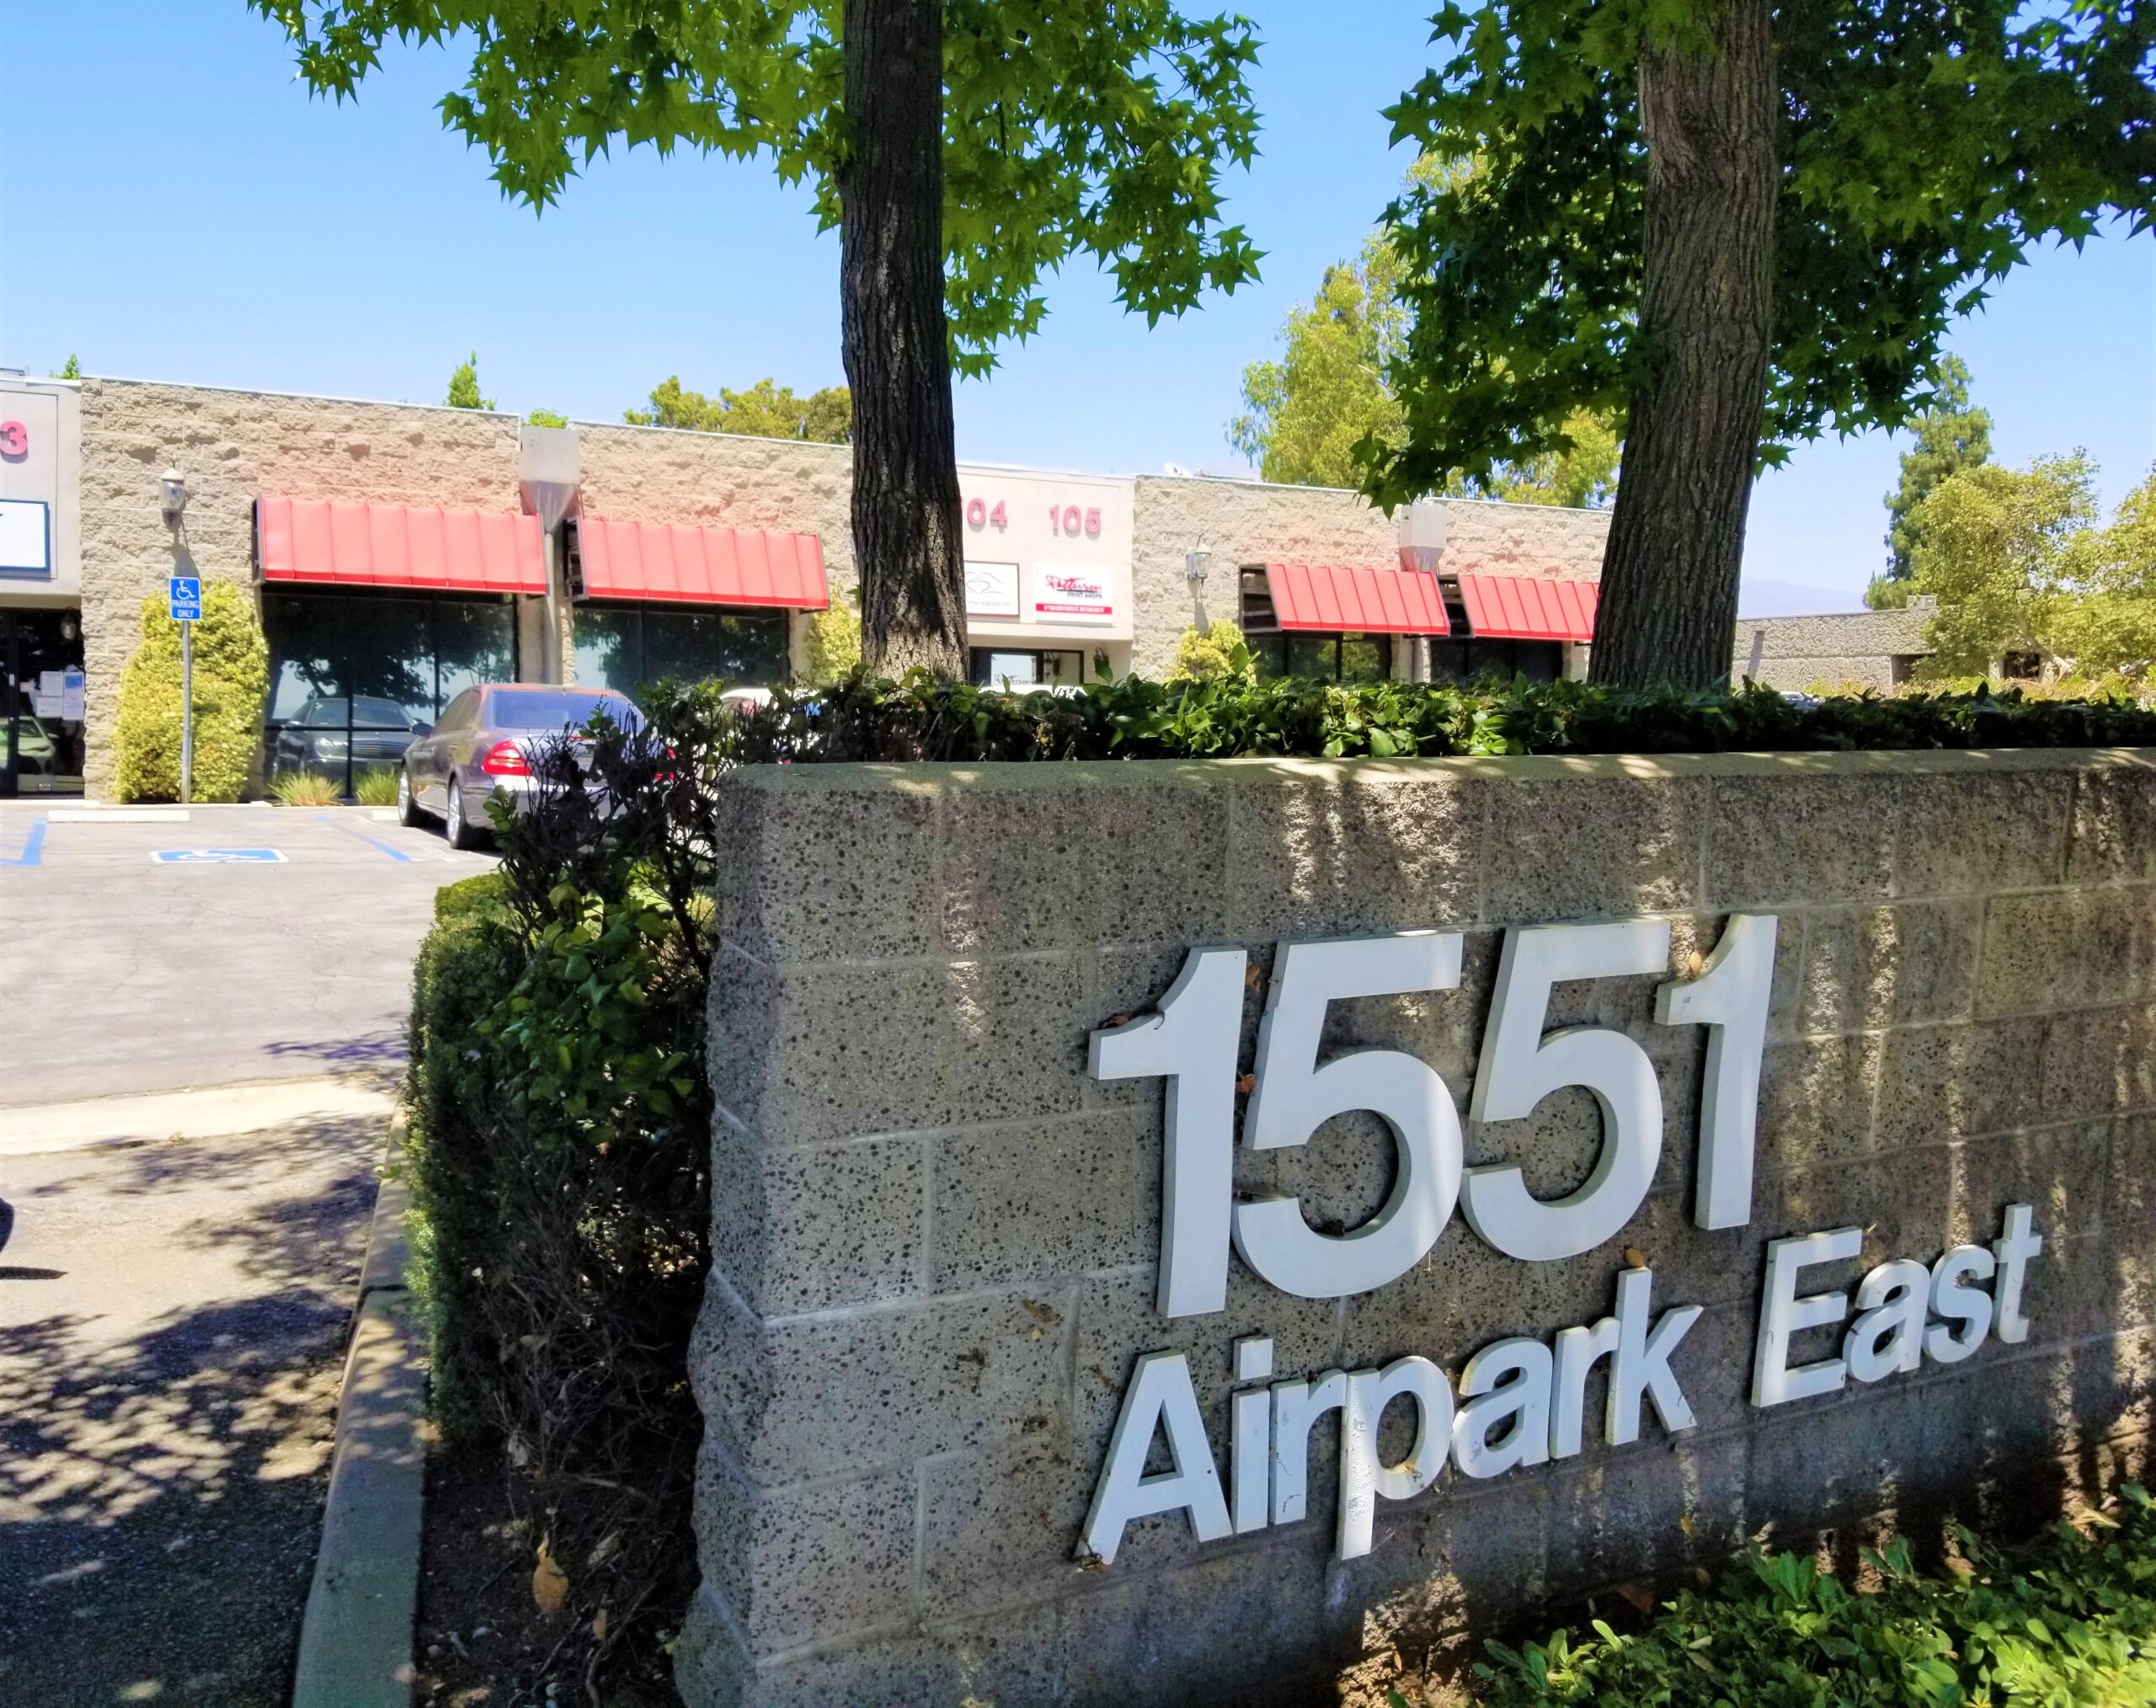 1551 Airpark East Exterior